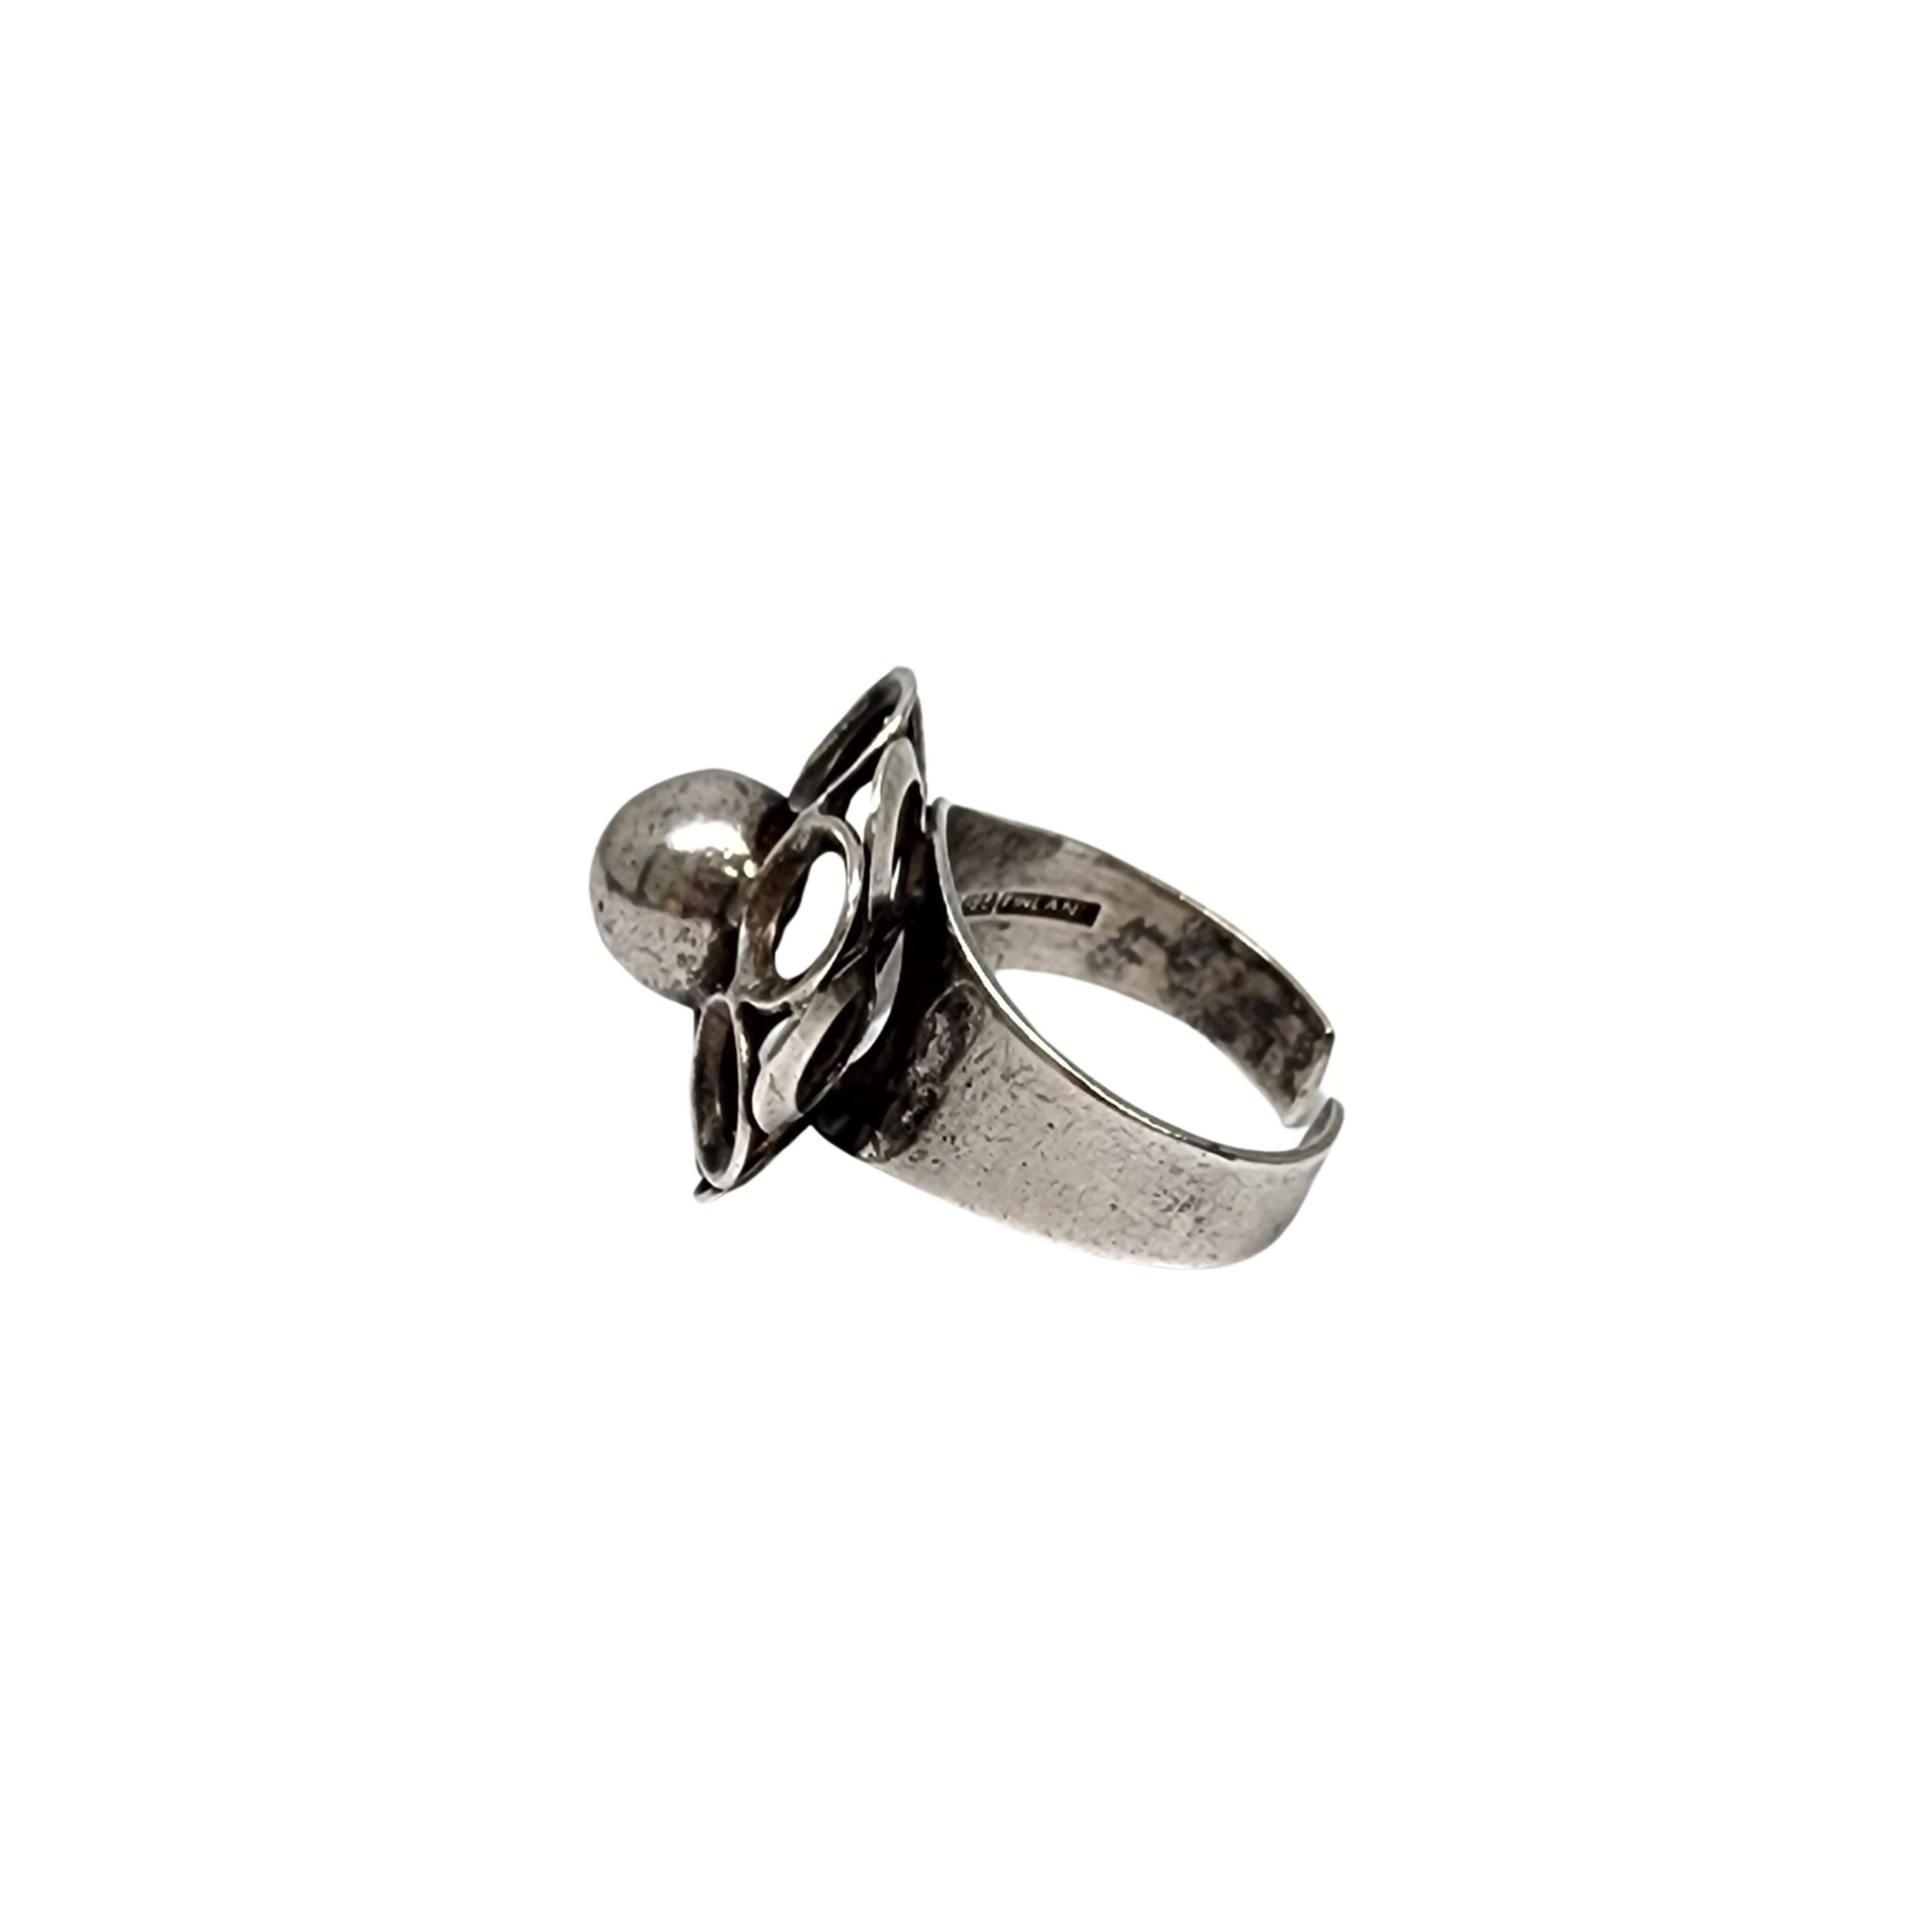 Sterling silver flower ring by Kultaseppa Salovaara of Finland.

Size is adjustable.

Modern design open petal flower with silver bead center, this ring is open at the back for an adjustable fit. Currently fits size 8.

Measures approx 7/8